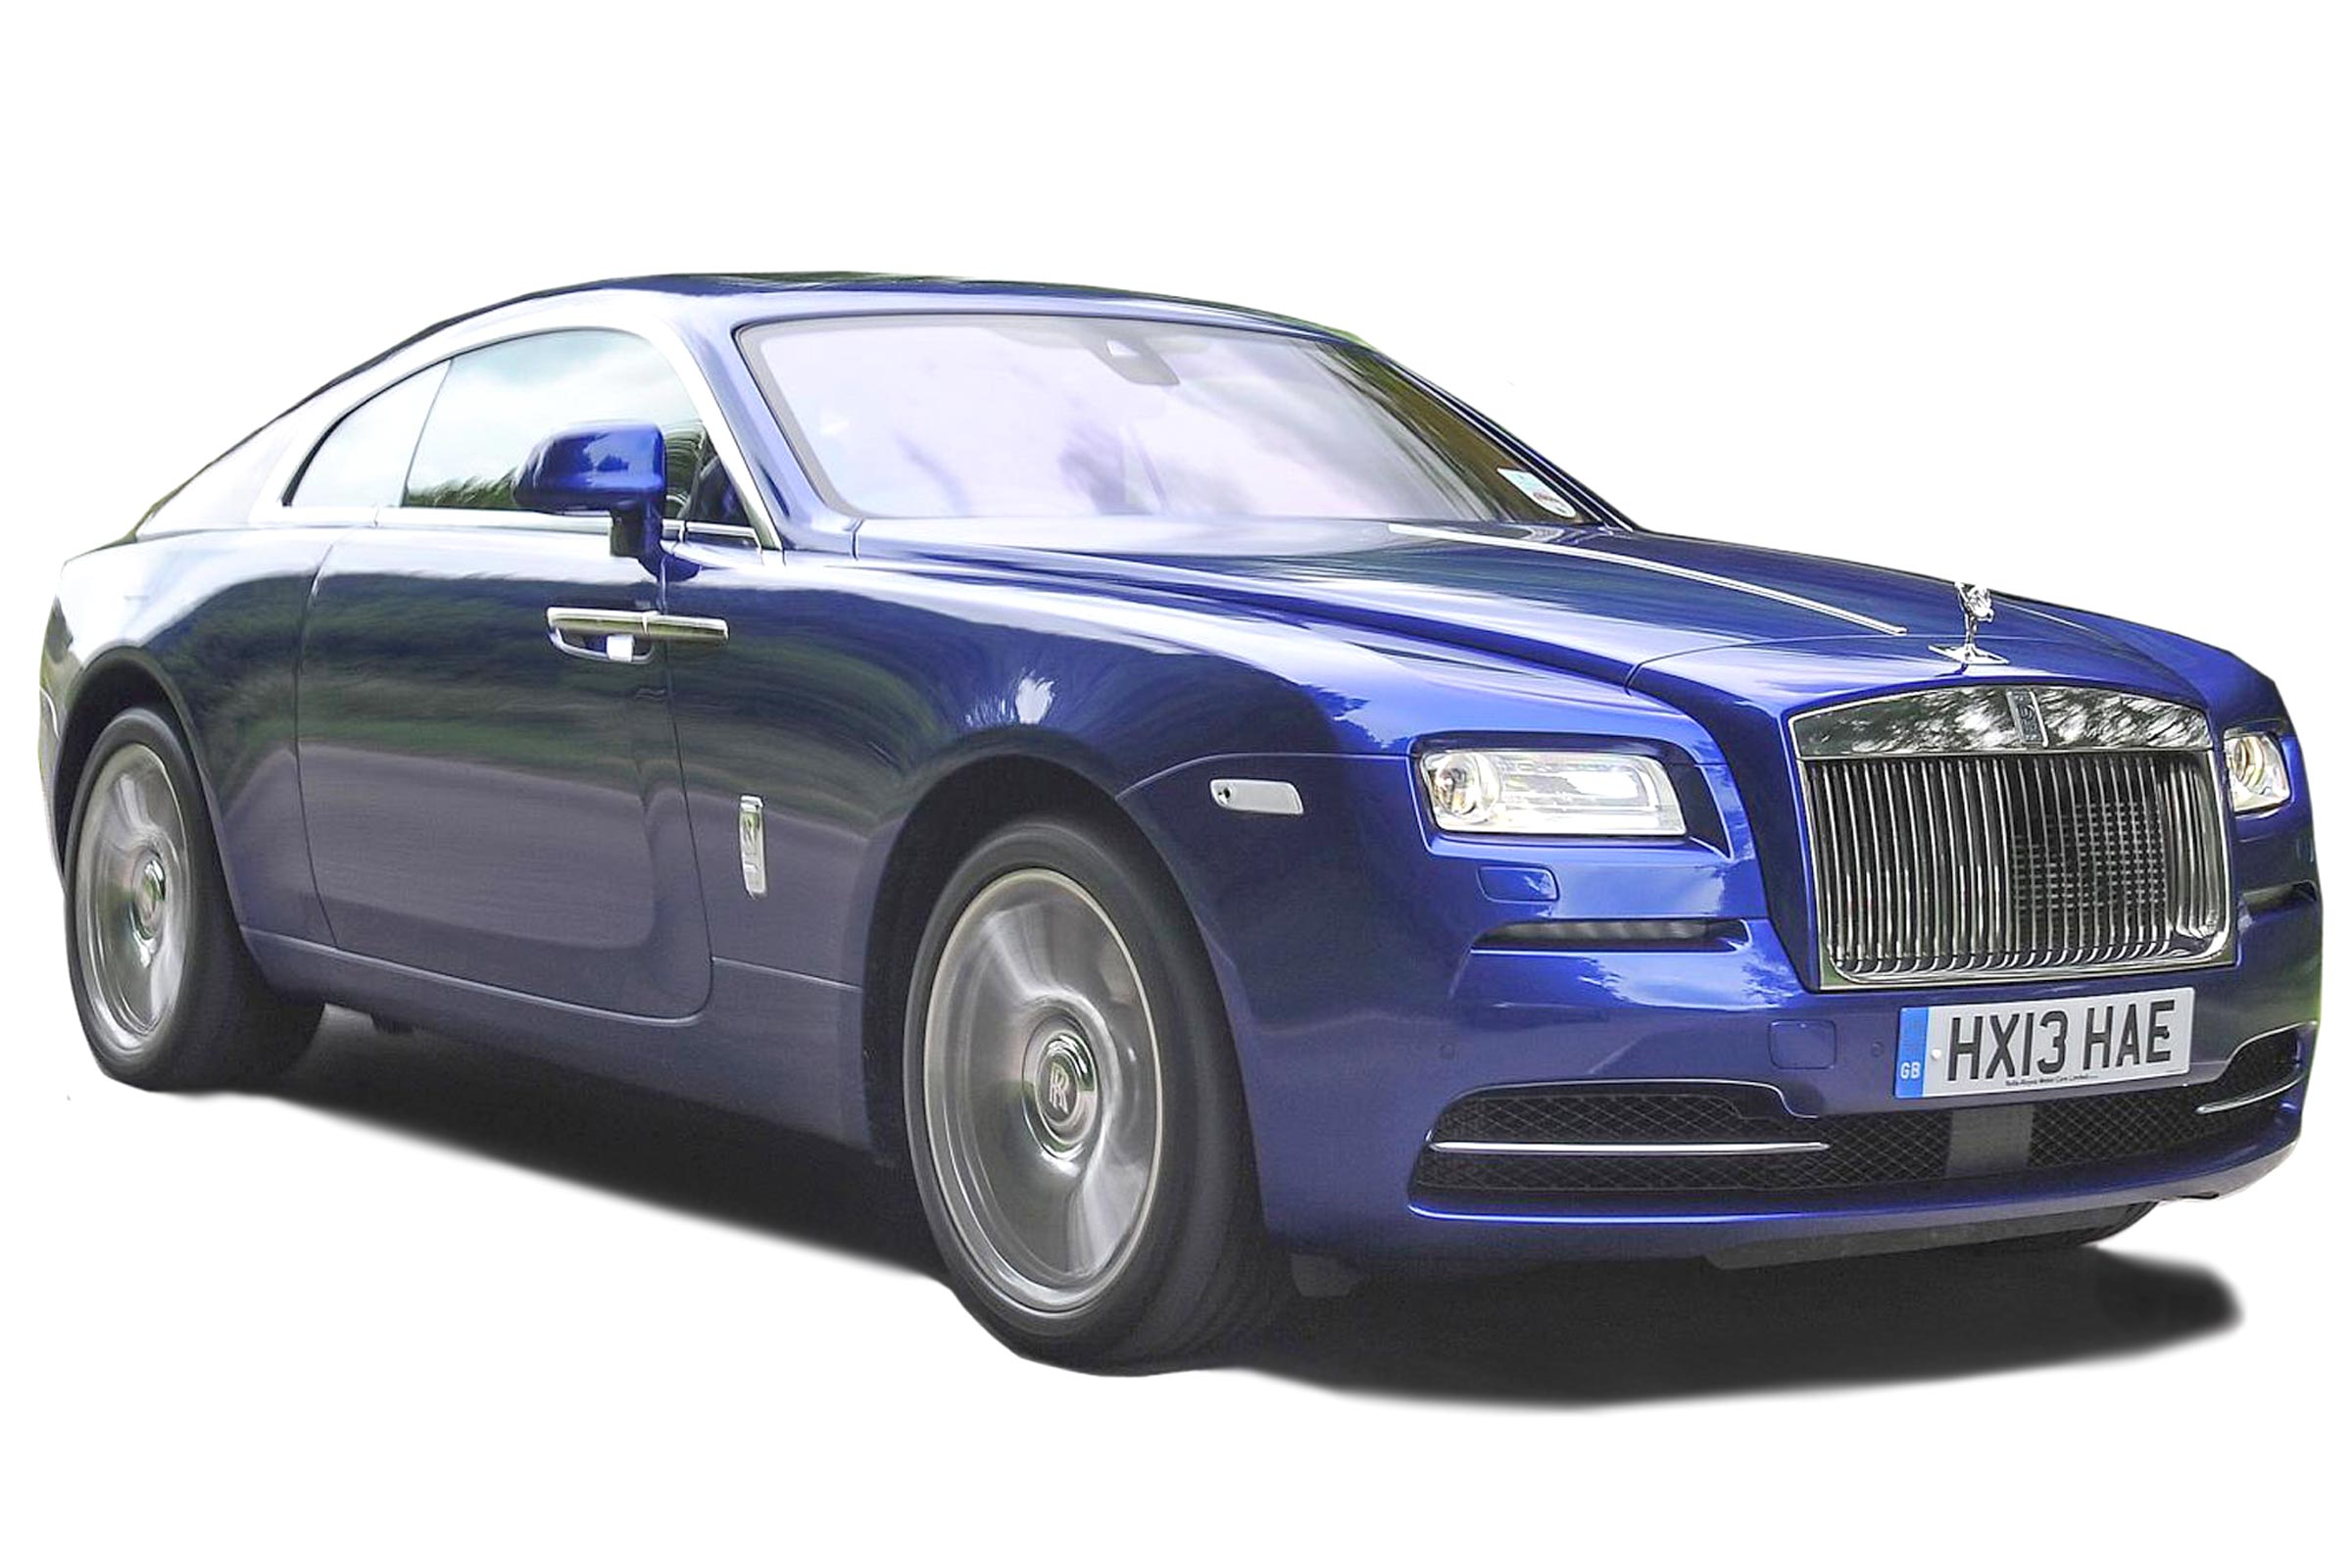 The Black Arrow is a powerful parting shot for the RollsRoyce Wraith   Hagerty UK